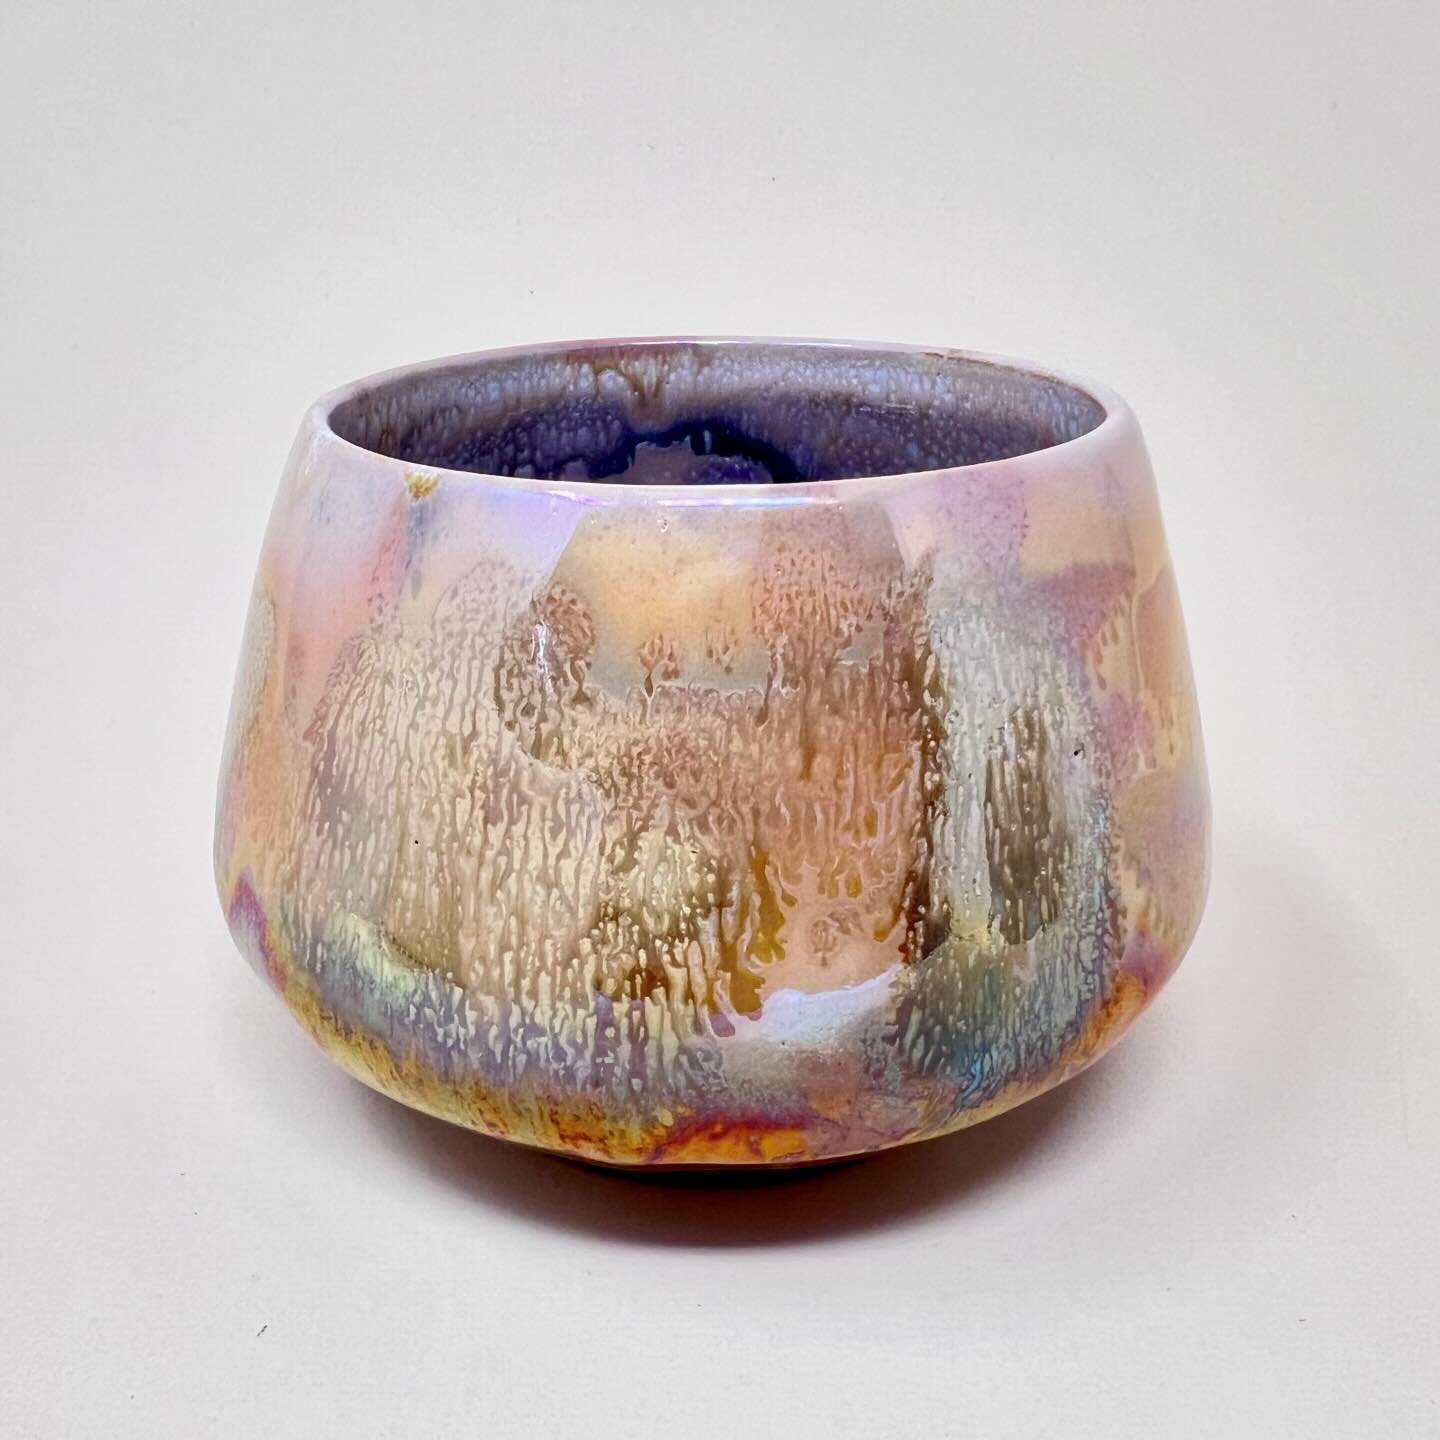 Check out details on this babe!!! This is one of my fav Lusterware Ritual Cups heading to &ldquo;Gathering&rdquo; at @neolagallery &hellip; come and join us for the opening reception, check out the ceramics and meet the artists, May 3rd 5-9pm. 
.⁣
.⁣